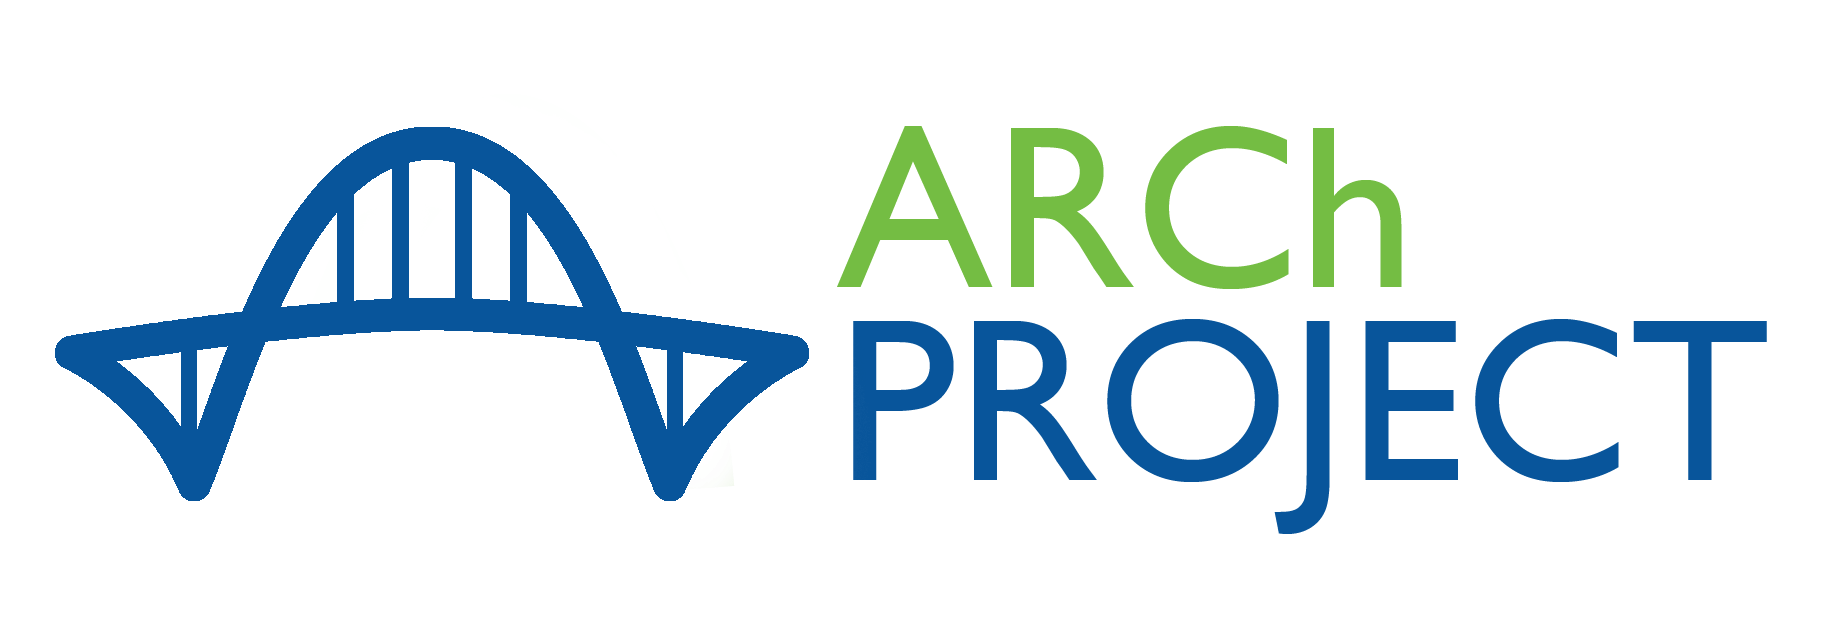 The logo for the ARCh Project, a funding partner of NCIMHA.